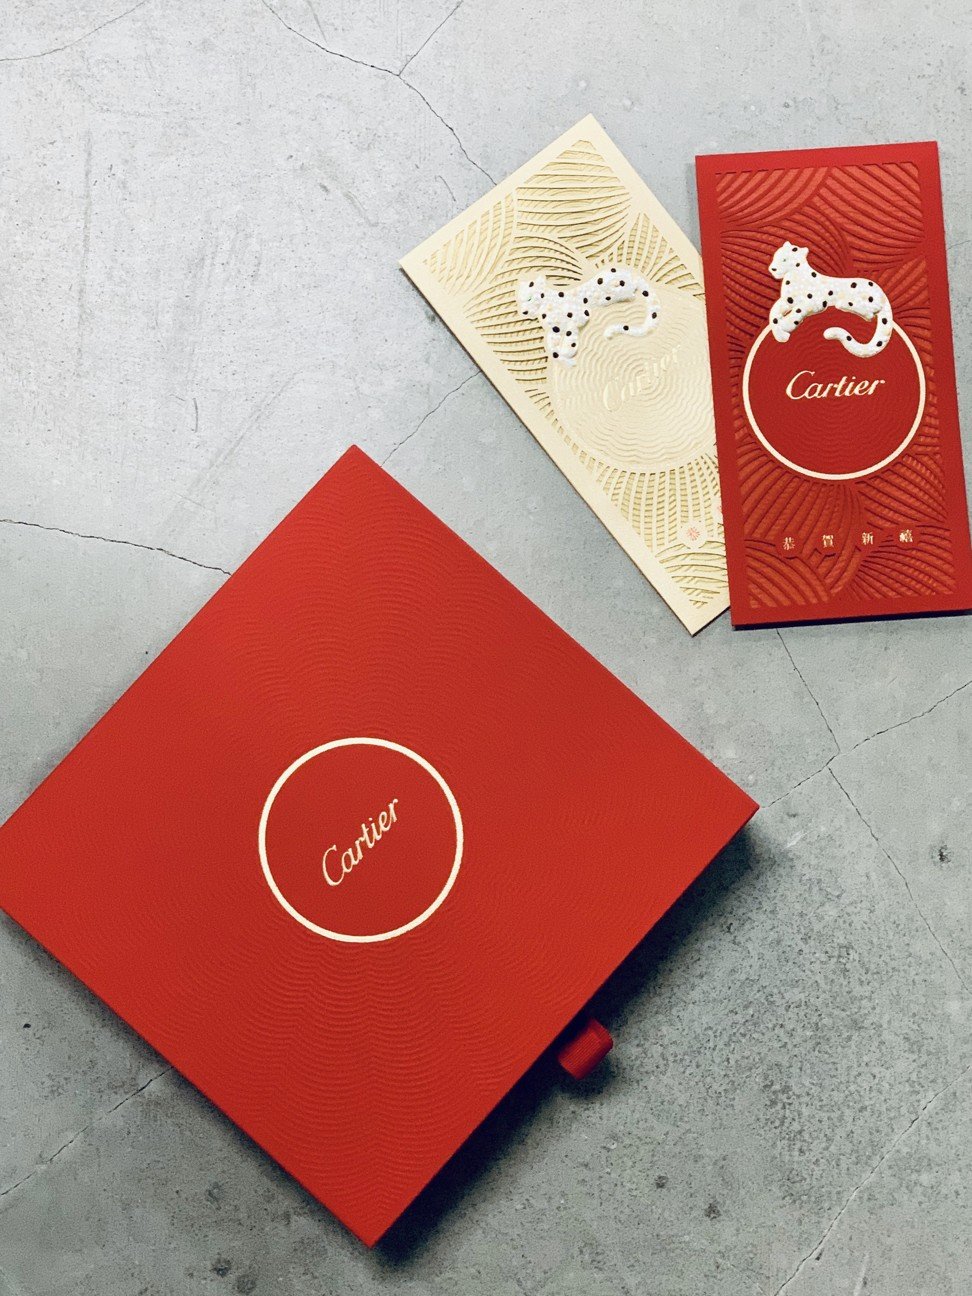 Cartier's red packet for 2020